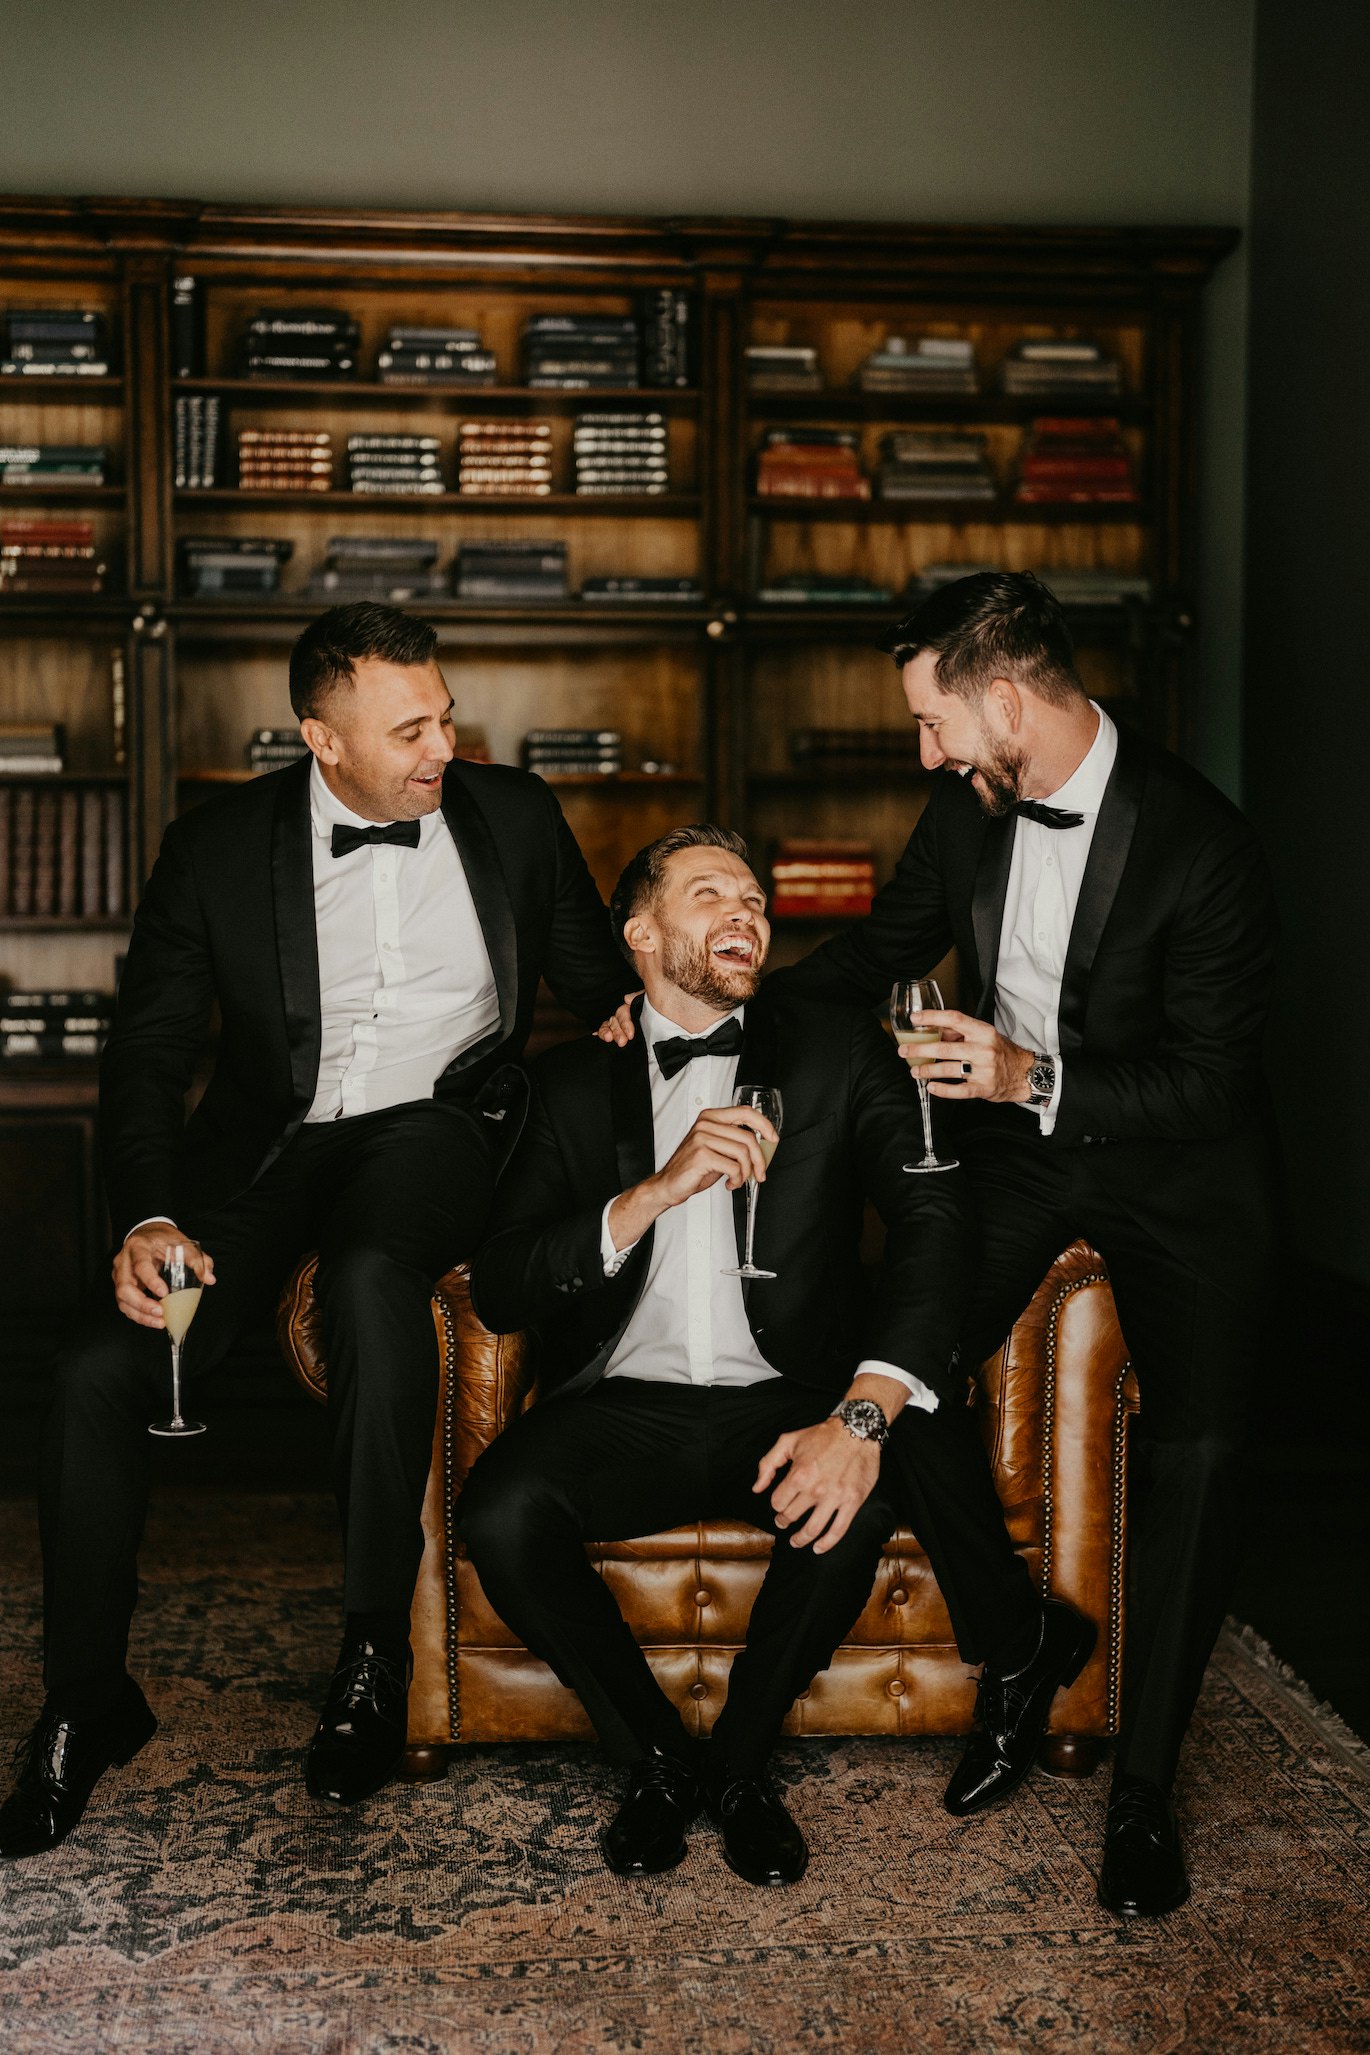 Groom and groomsmen sitting on leather chair